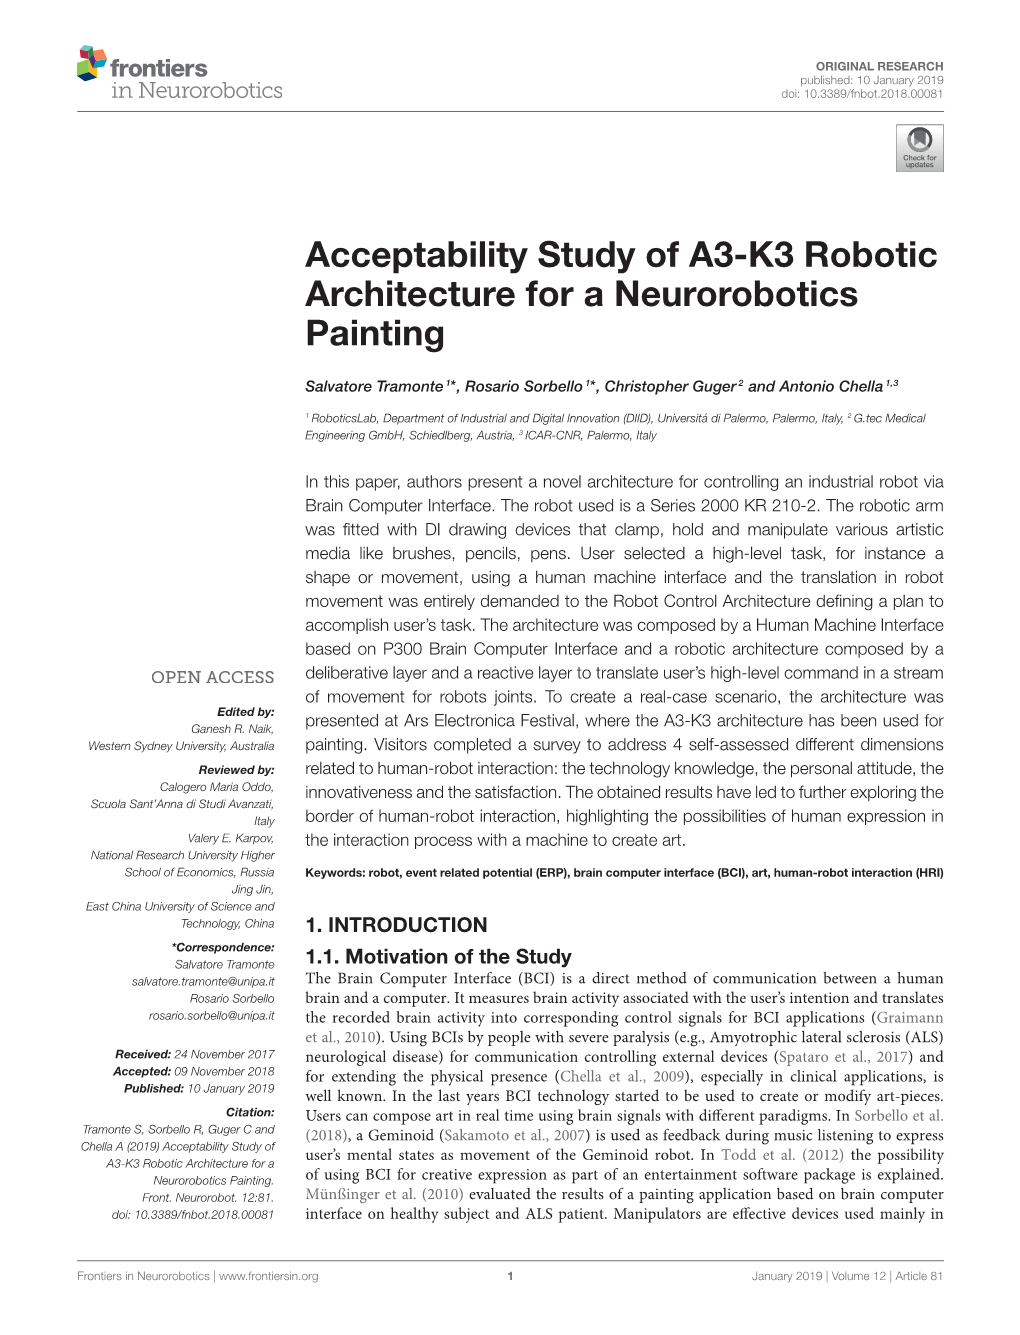 Acceptability Study of A3-K3 Robotic Architecture for a Neurorobotics Painting